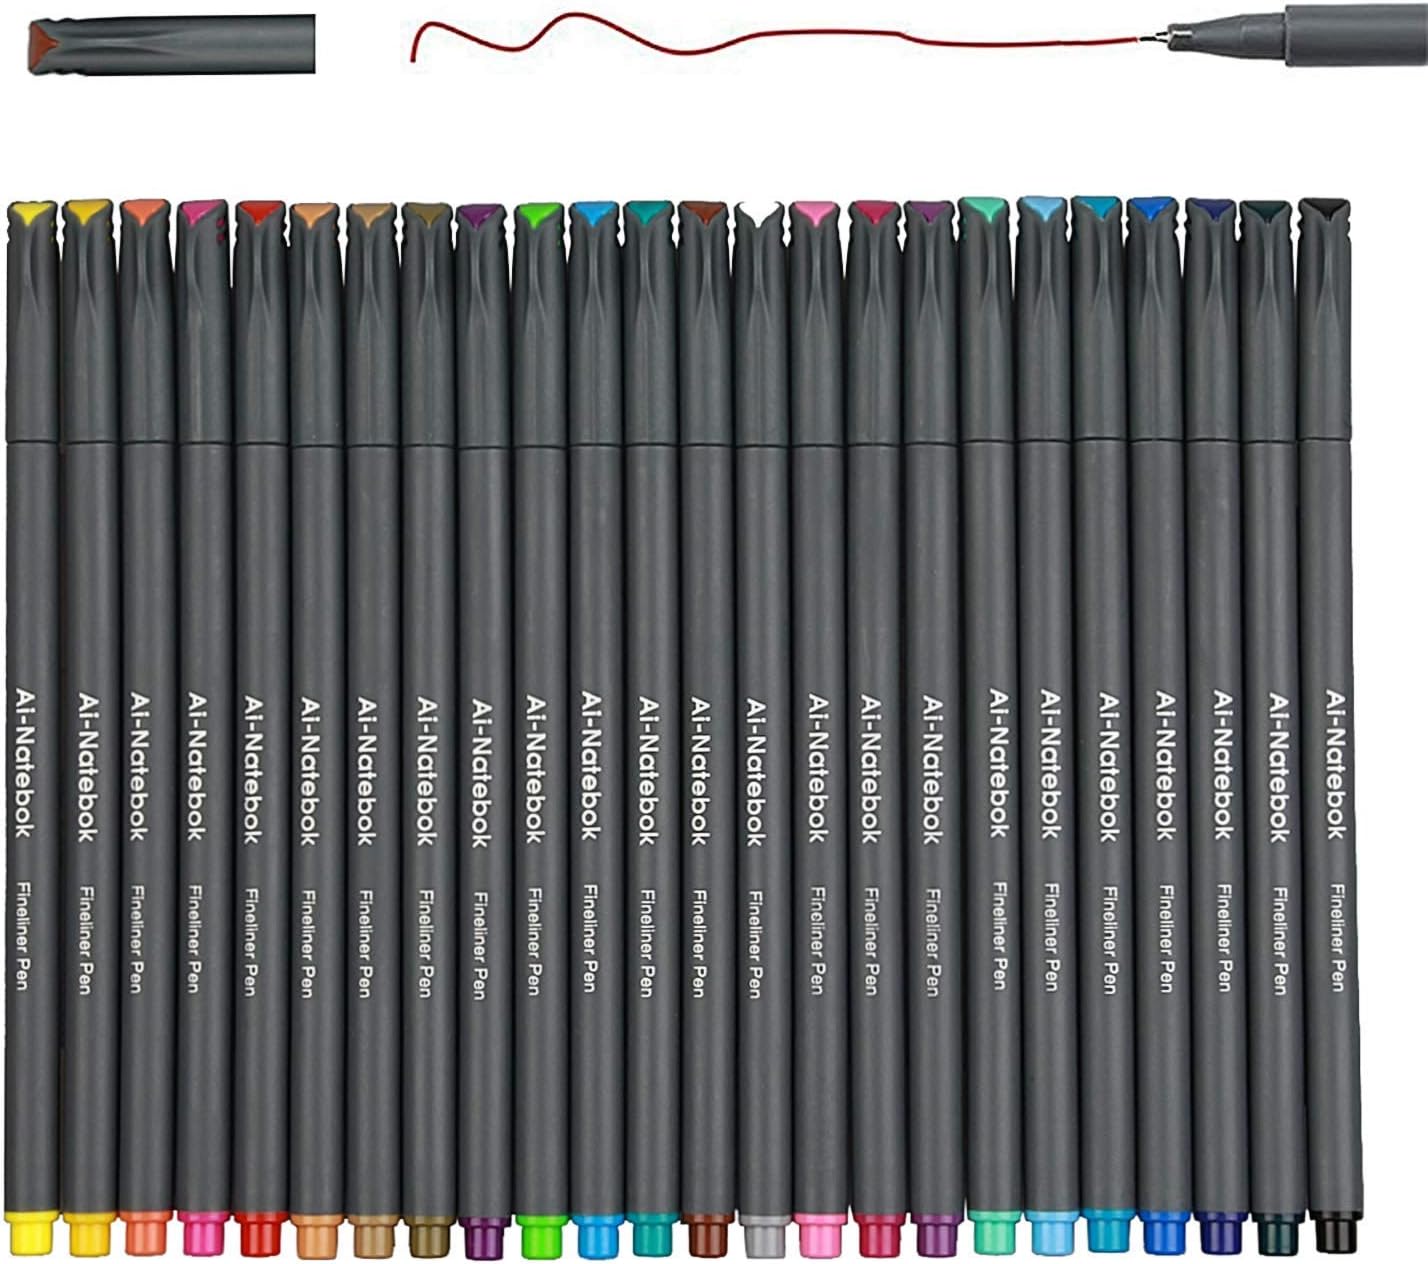 These markers are the best for bullet journaling, planners, or calendars. I love how fine the tip is, how nicely they colors are and THEY DO NOT BLEED at all and I love it! I use these to plan and color coordinate on our planning calendar, and I use them to journal as well. These are absolutely great markers for the price point!